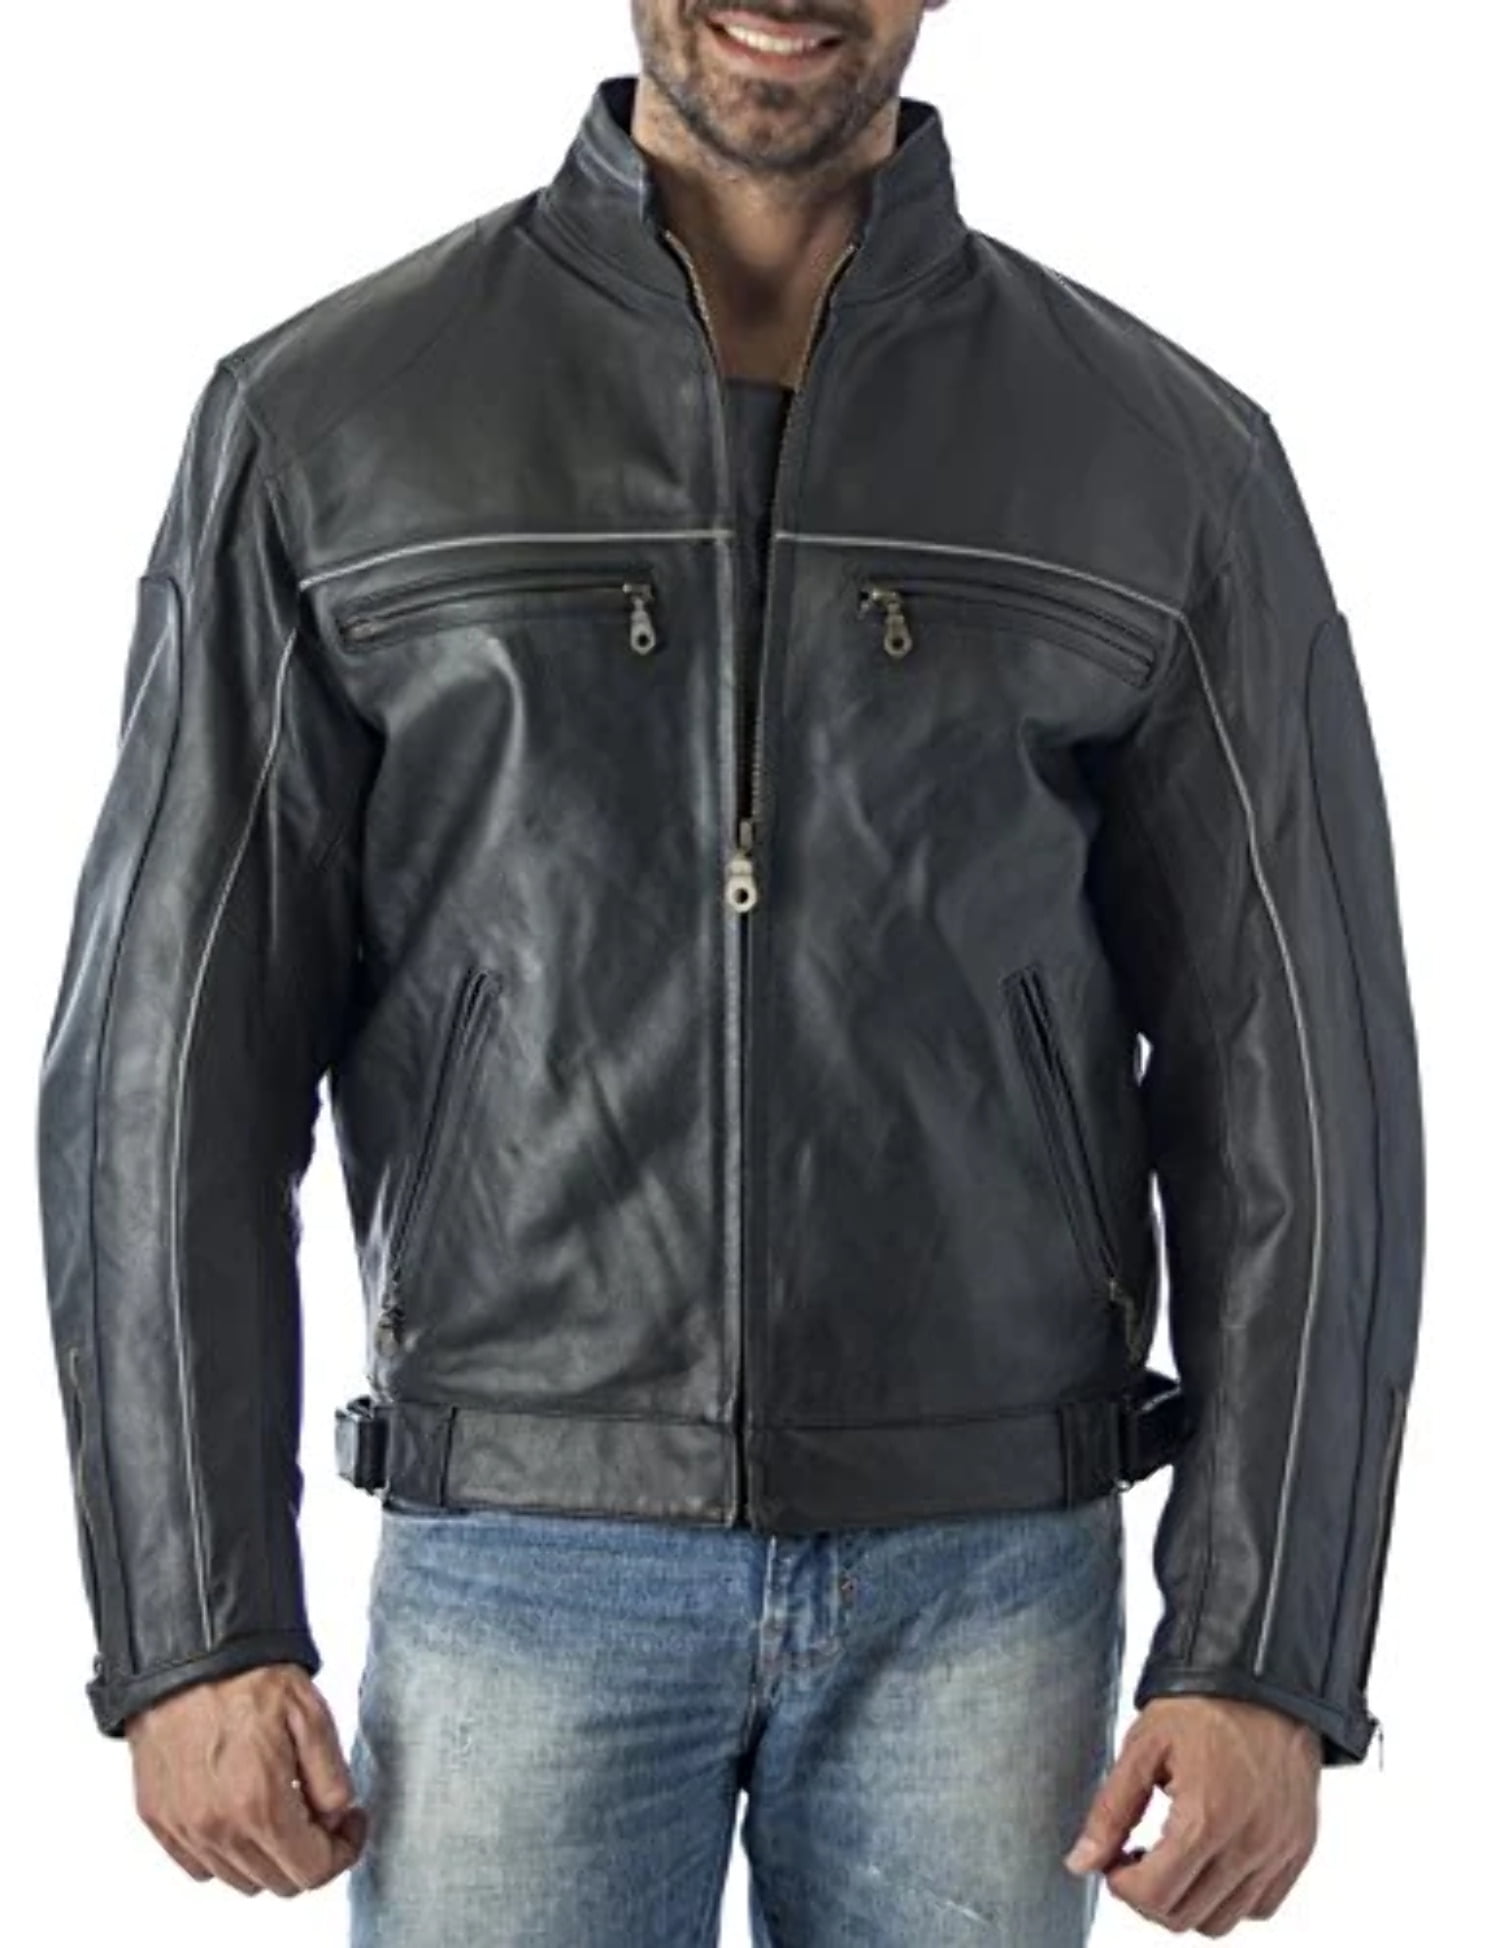 reed mens vented leather motorcycle jacket with light reflector strips ...